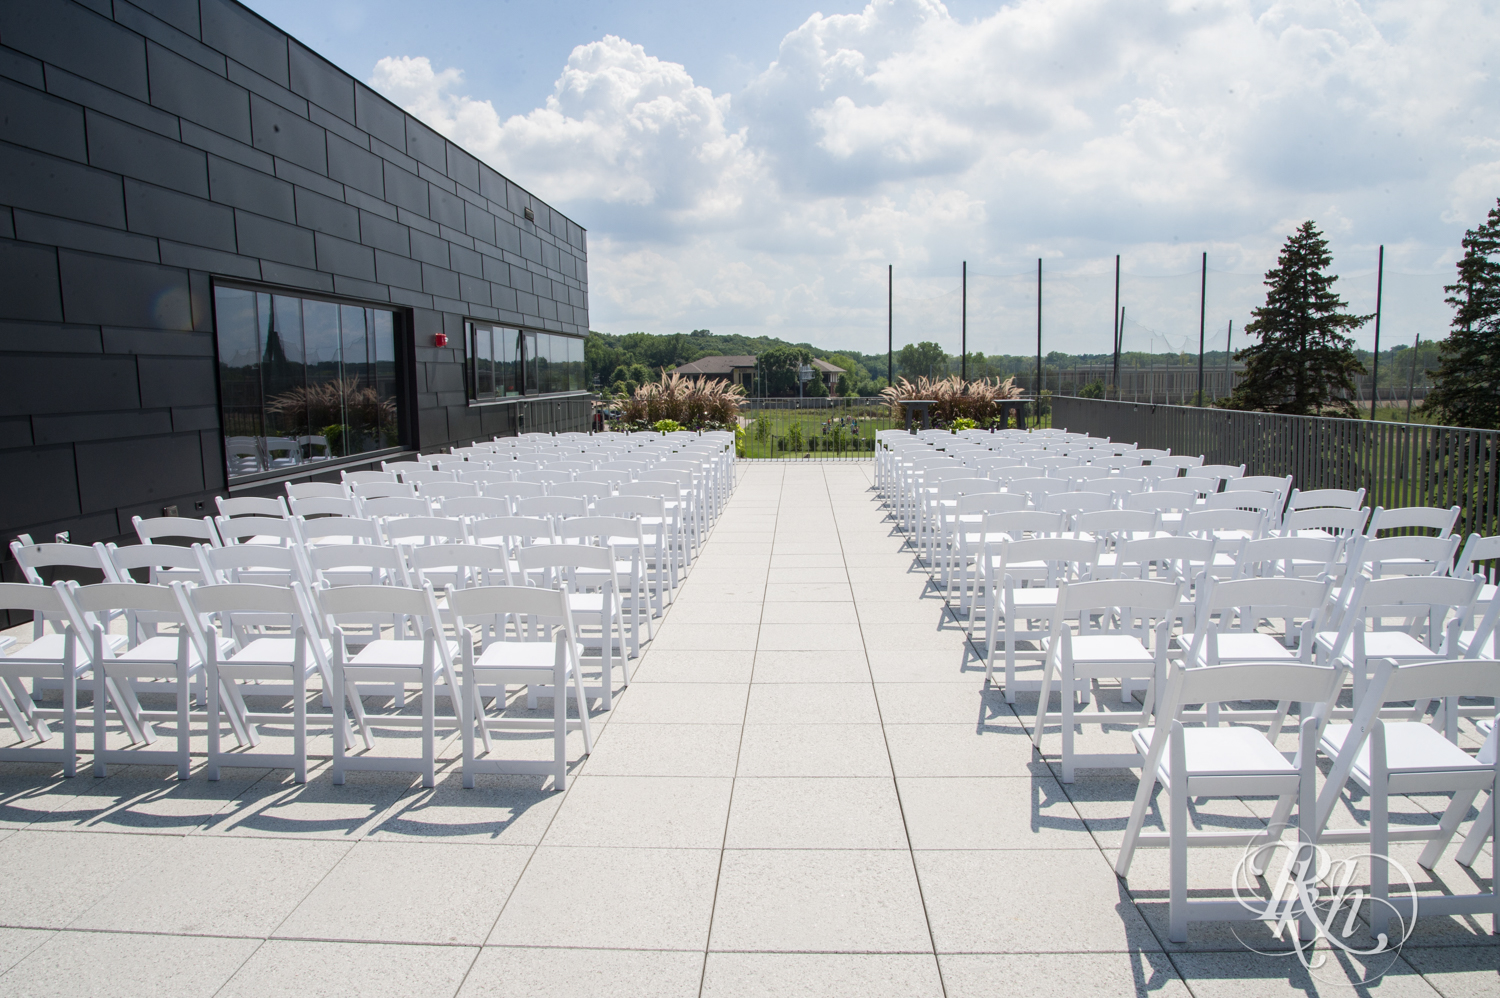 Outdoor summer wedding ceremony setup at Brookview Golf Course in Golden Valley, Minnesota.